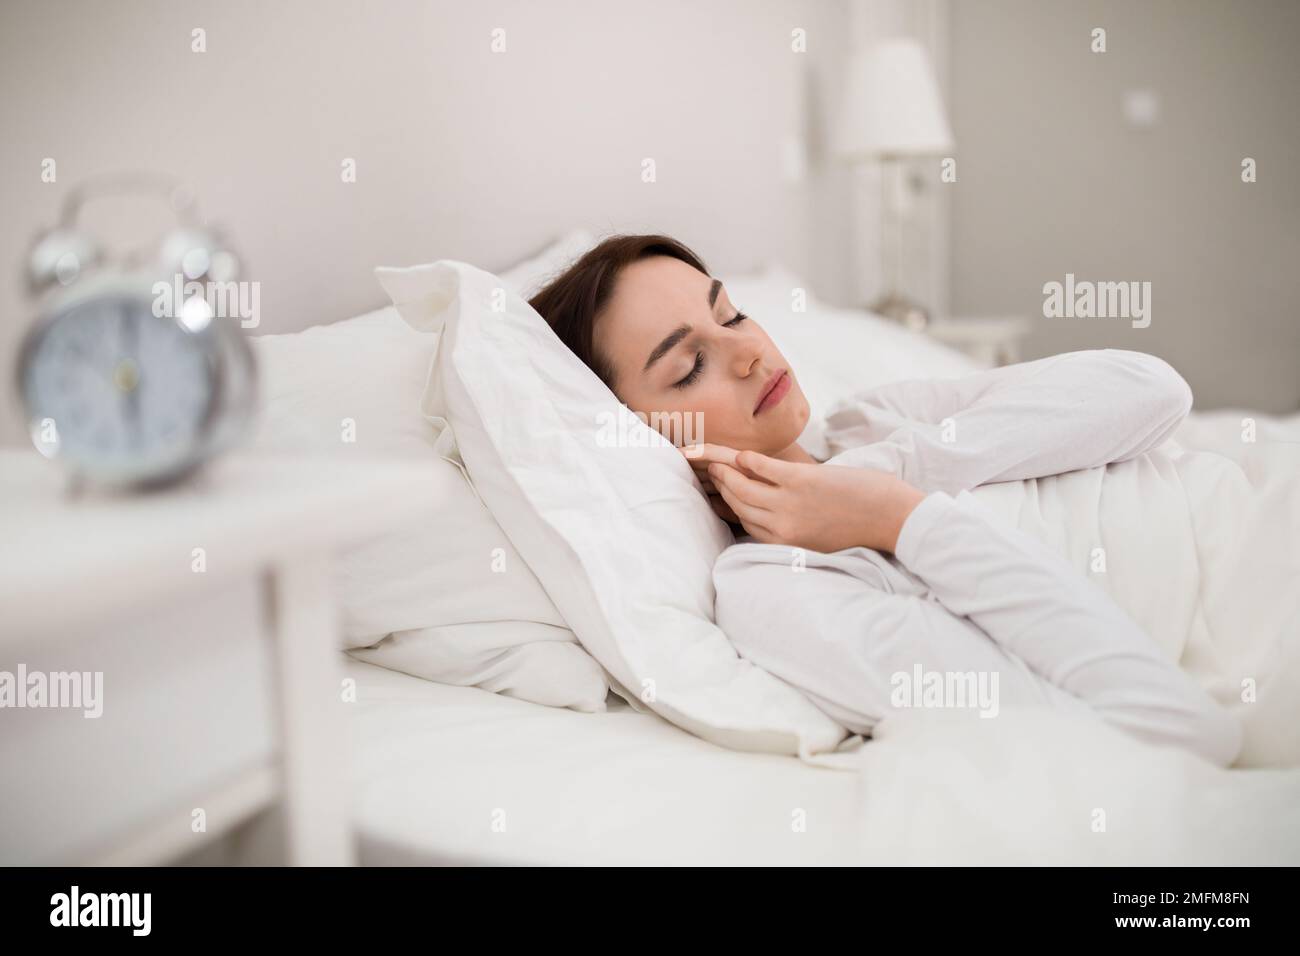 Pretty woman in white pajamas sleeping in bed at bedroom Stock Photo